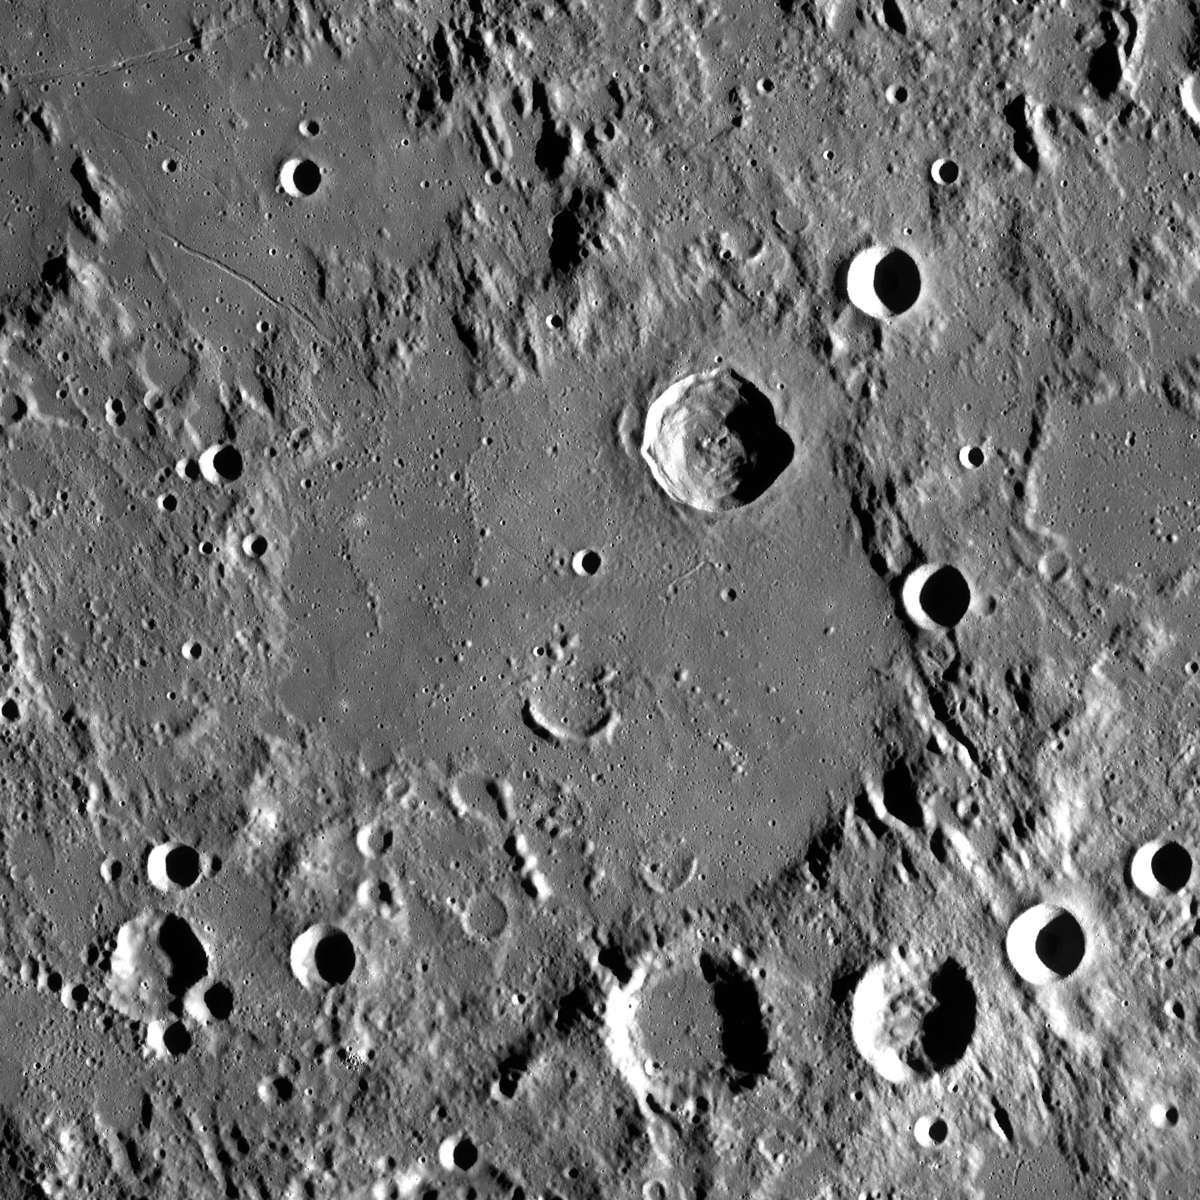 the large, degraded crater